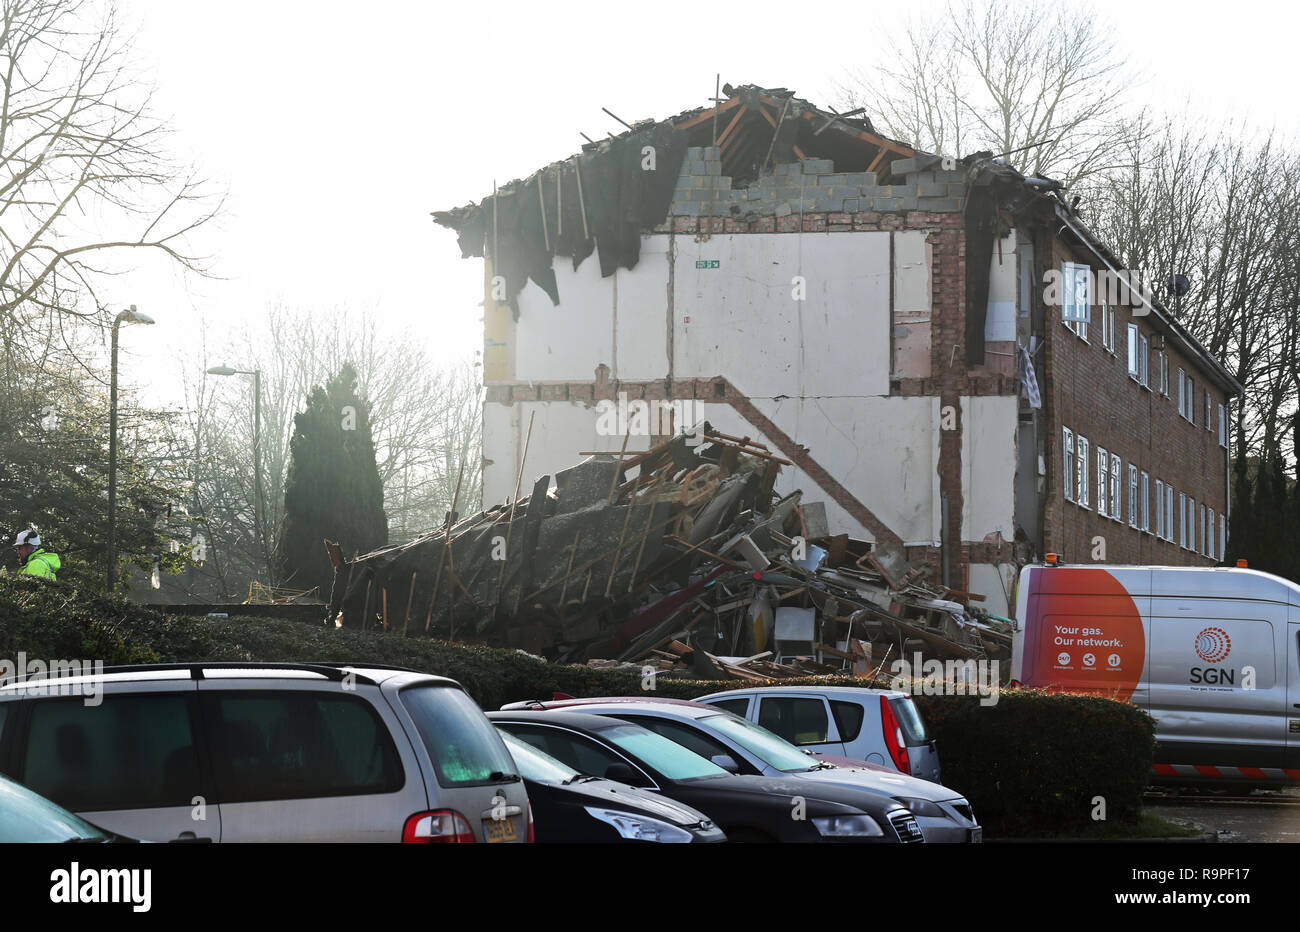 The scene in Launcelot Close, Andover, where Hampshire Police say that the body of a man has been found after an explosion caused a building to collapse this morning. Stock Photo